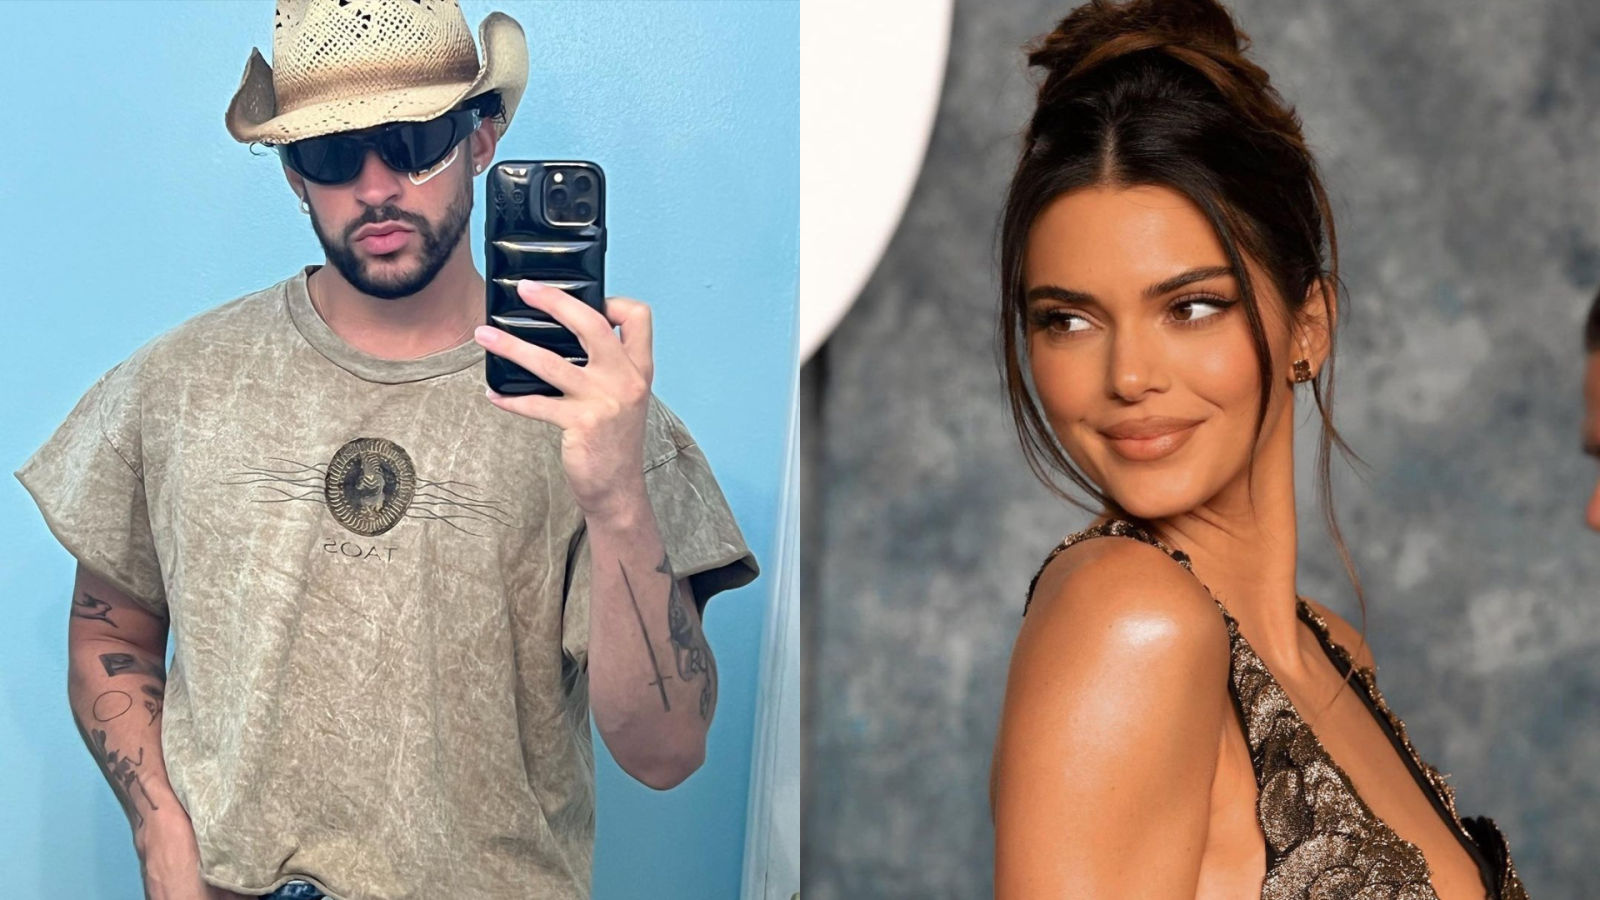 Kendall Jenner seen in sheer blue dress amid Bad Bunny romance